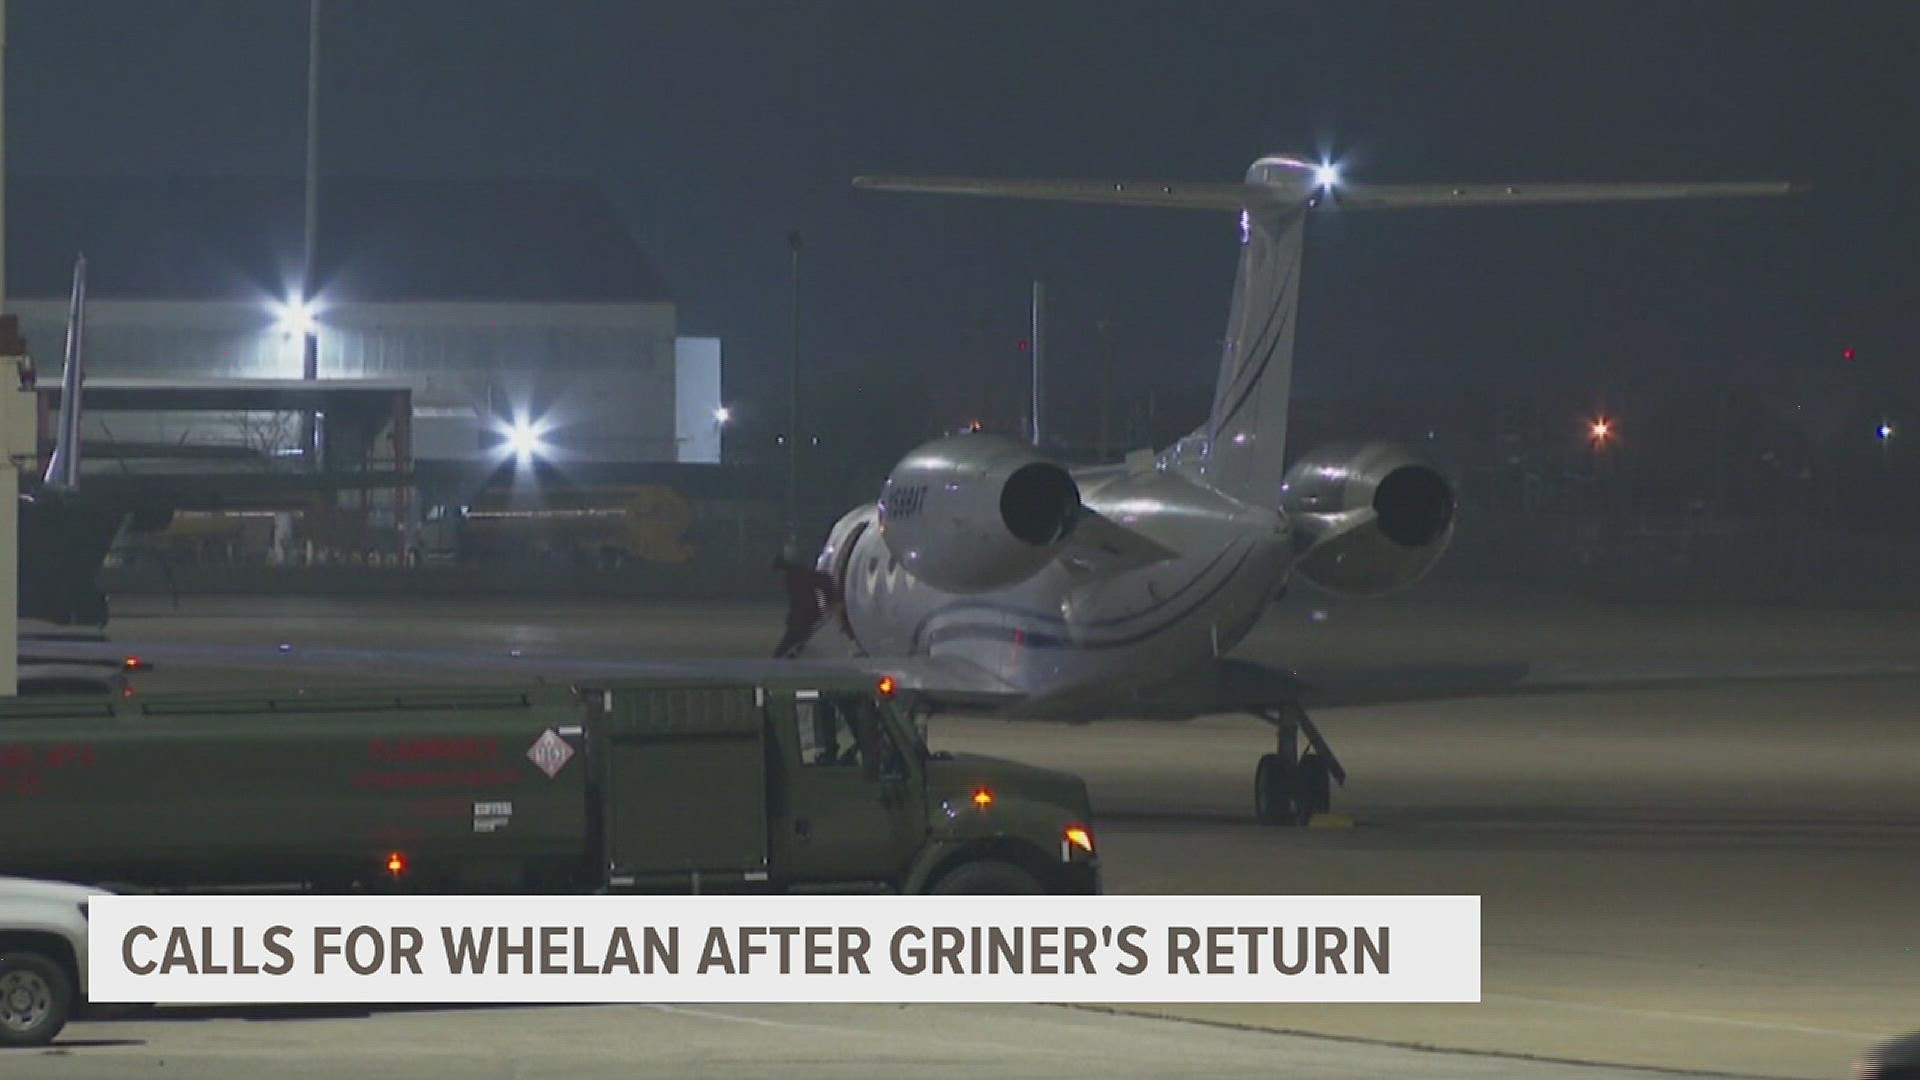 Griner, a two-time Olympic gold medalist was seen getting off a plane that landed Friday at Joint Base San Antonio-Lackland in Texas.